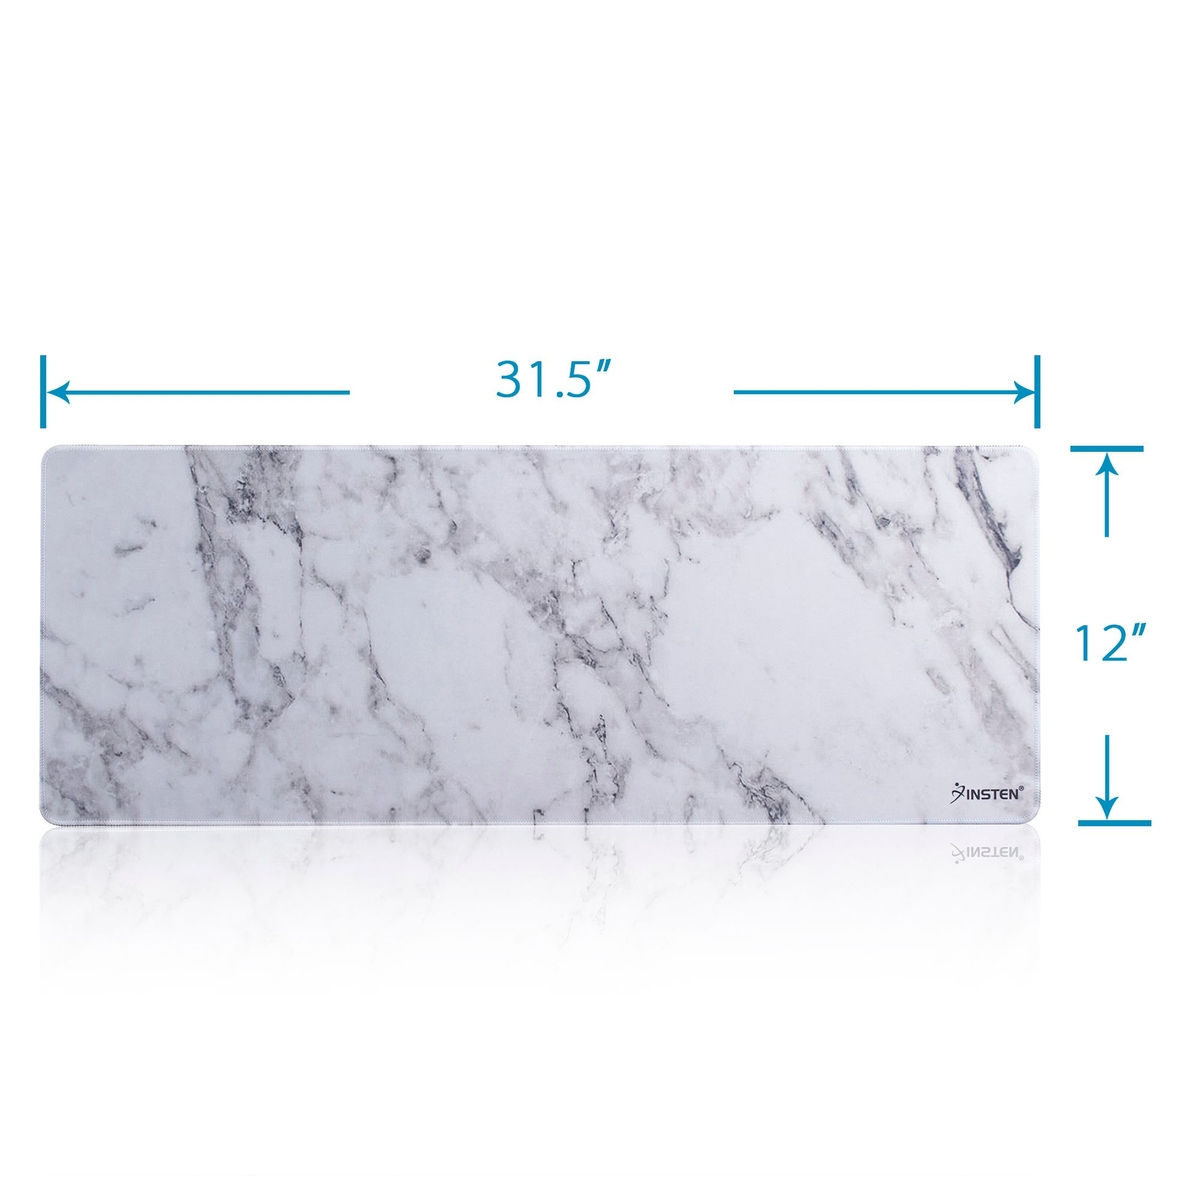 Insten Extended Gaming Mouse Pad Marble Design Long Mat (Size: 31" x 12") with Low Friction Smooth Surface and Non-Slip Backing for Desktop Mouse Keyboard Laptop White - image 2 of 9